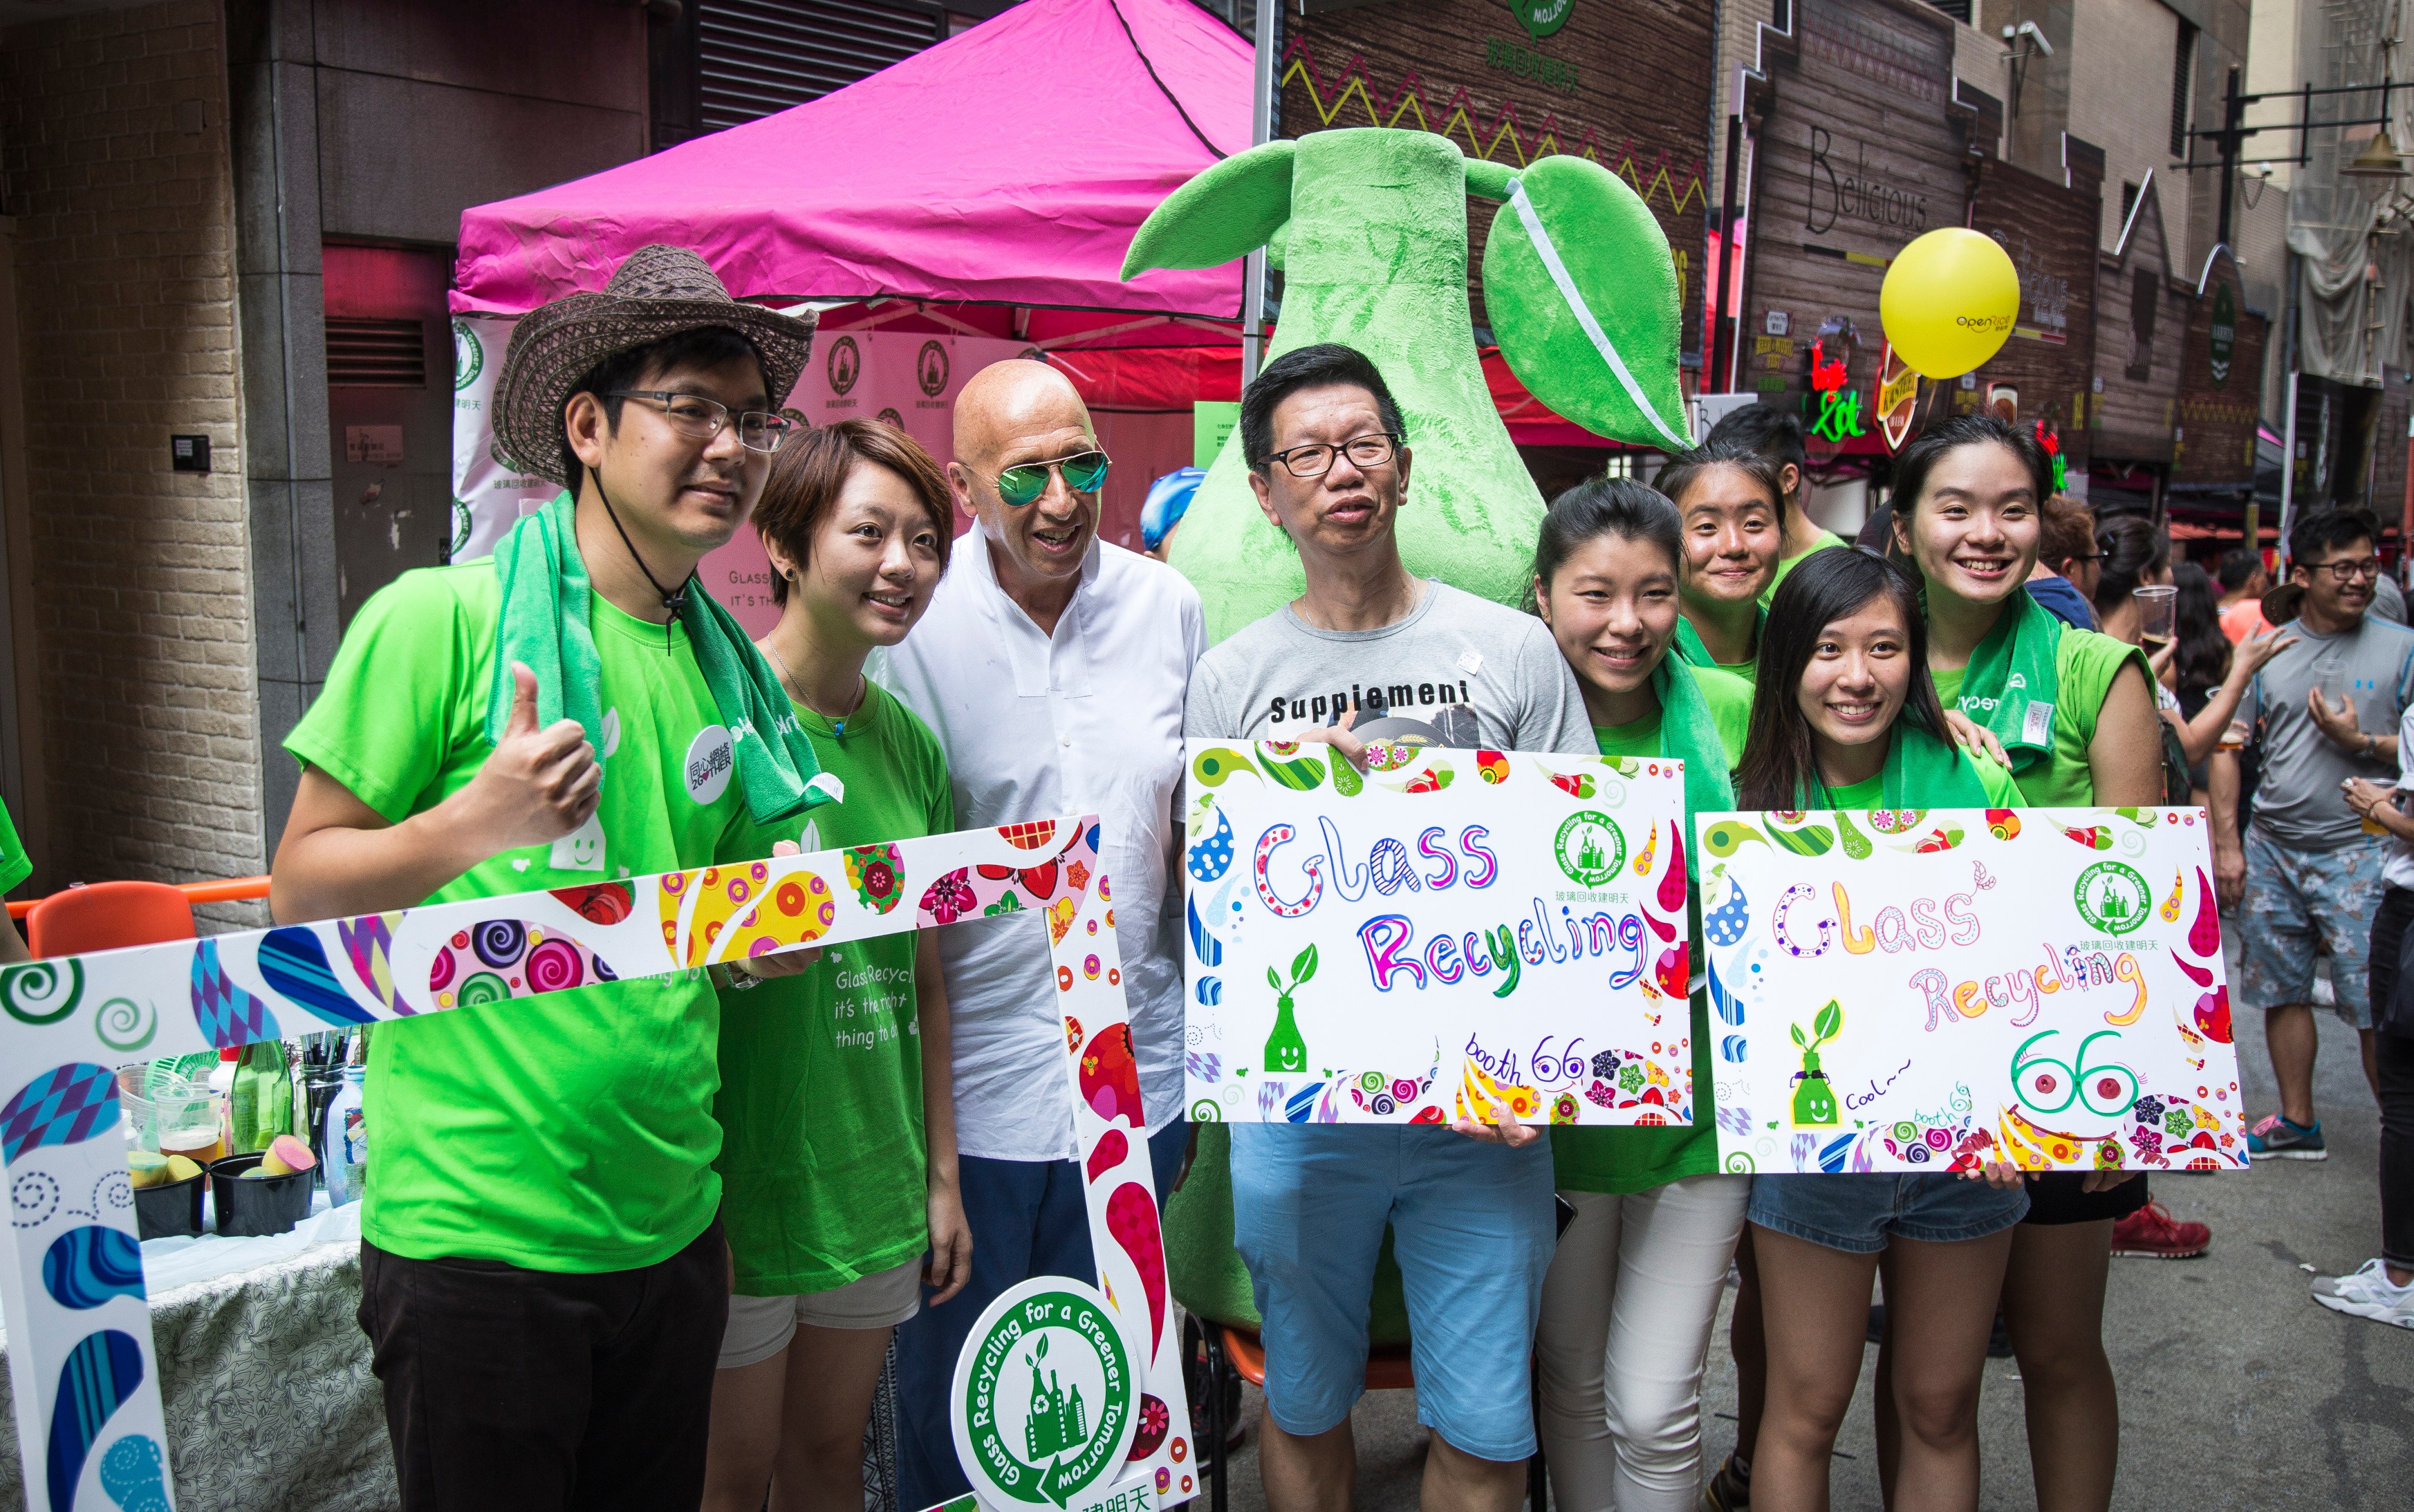 Chairman of Lan Kwai Fong Group Allan Zeman (third from left) at an event in 2015. The group has established the non-profit Lan Kwai Fong Association, with the aim of fostering a supportive community for local businesses. Photo: Handout